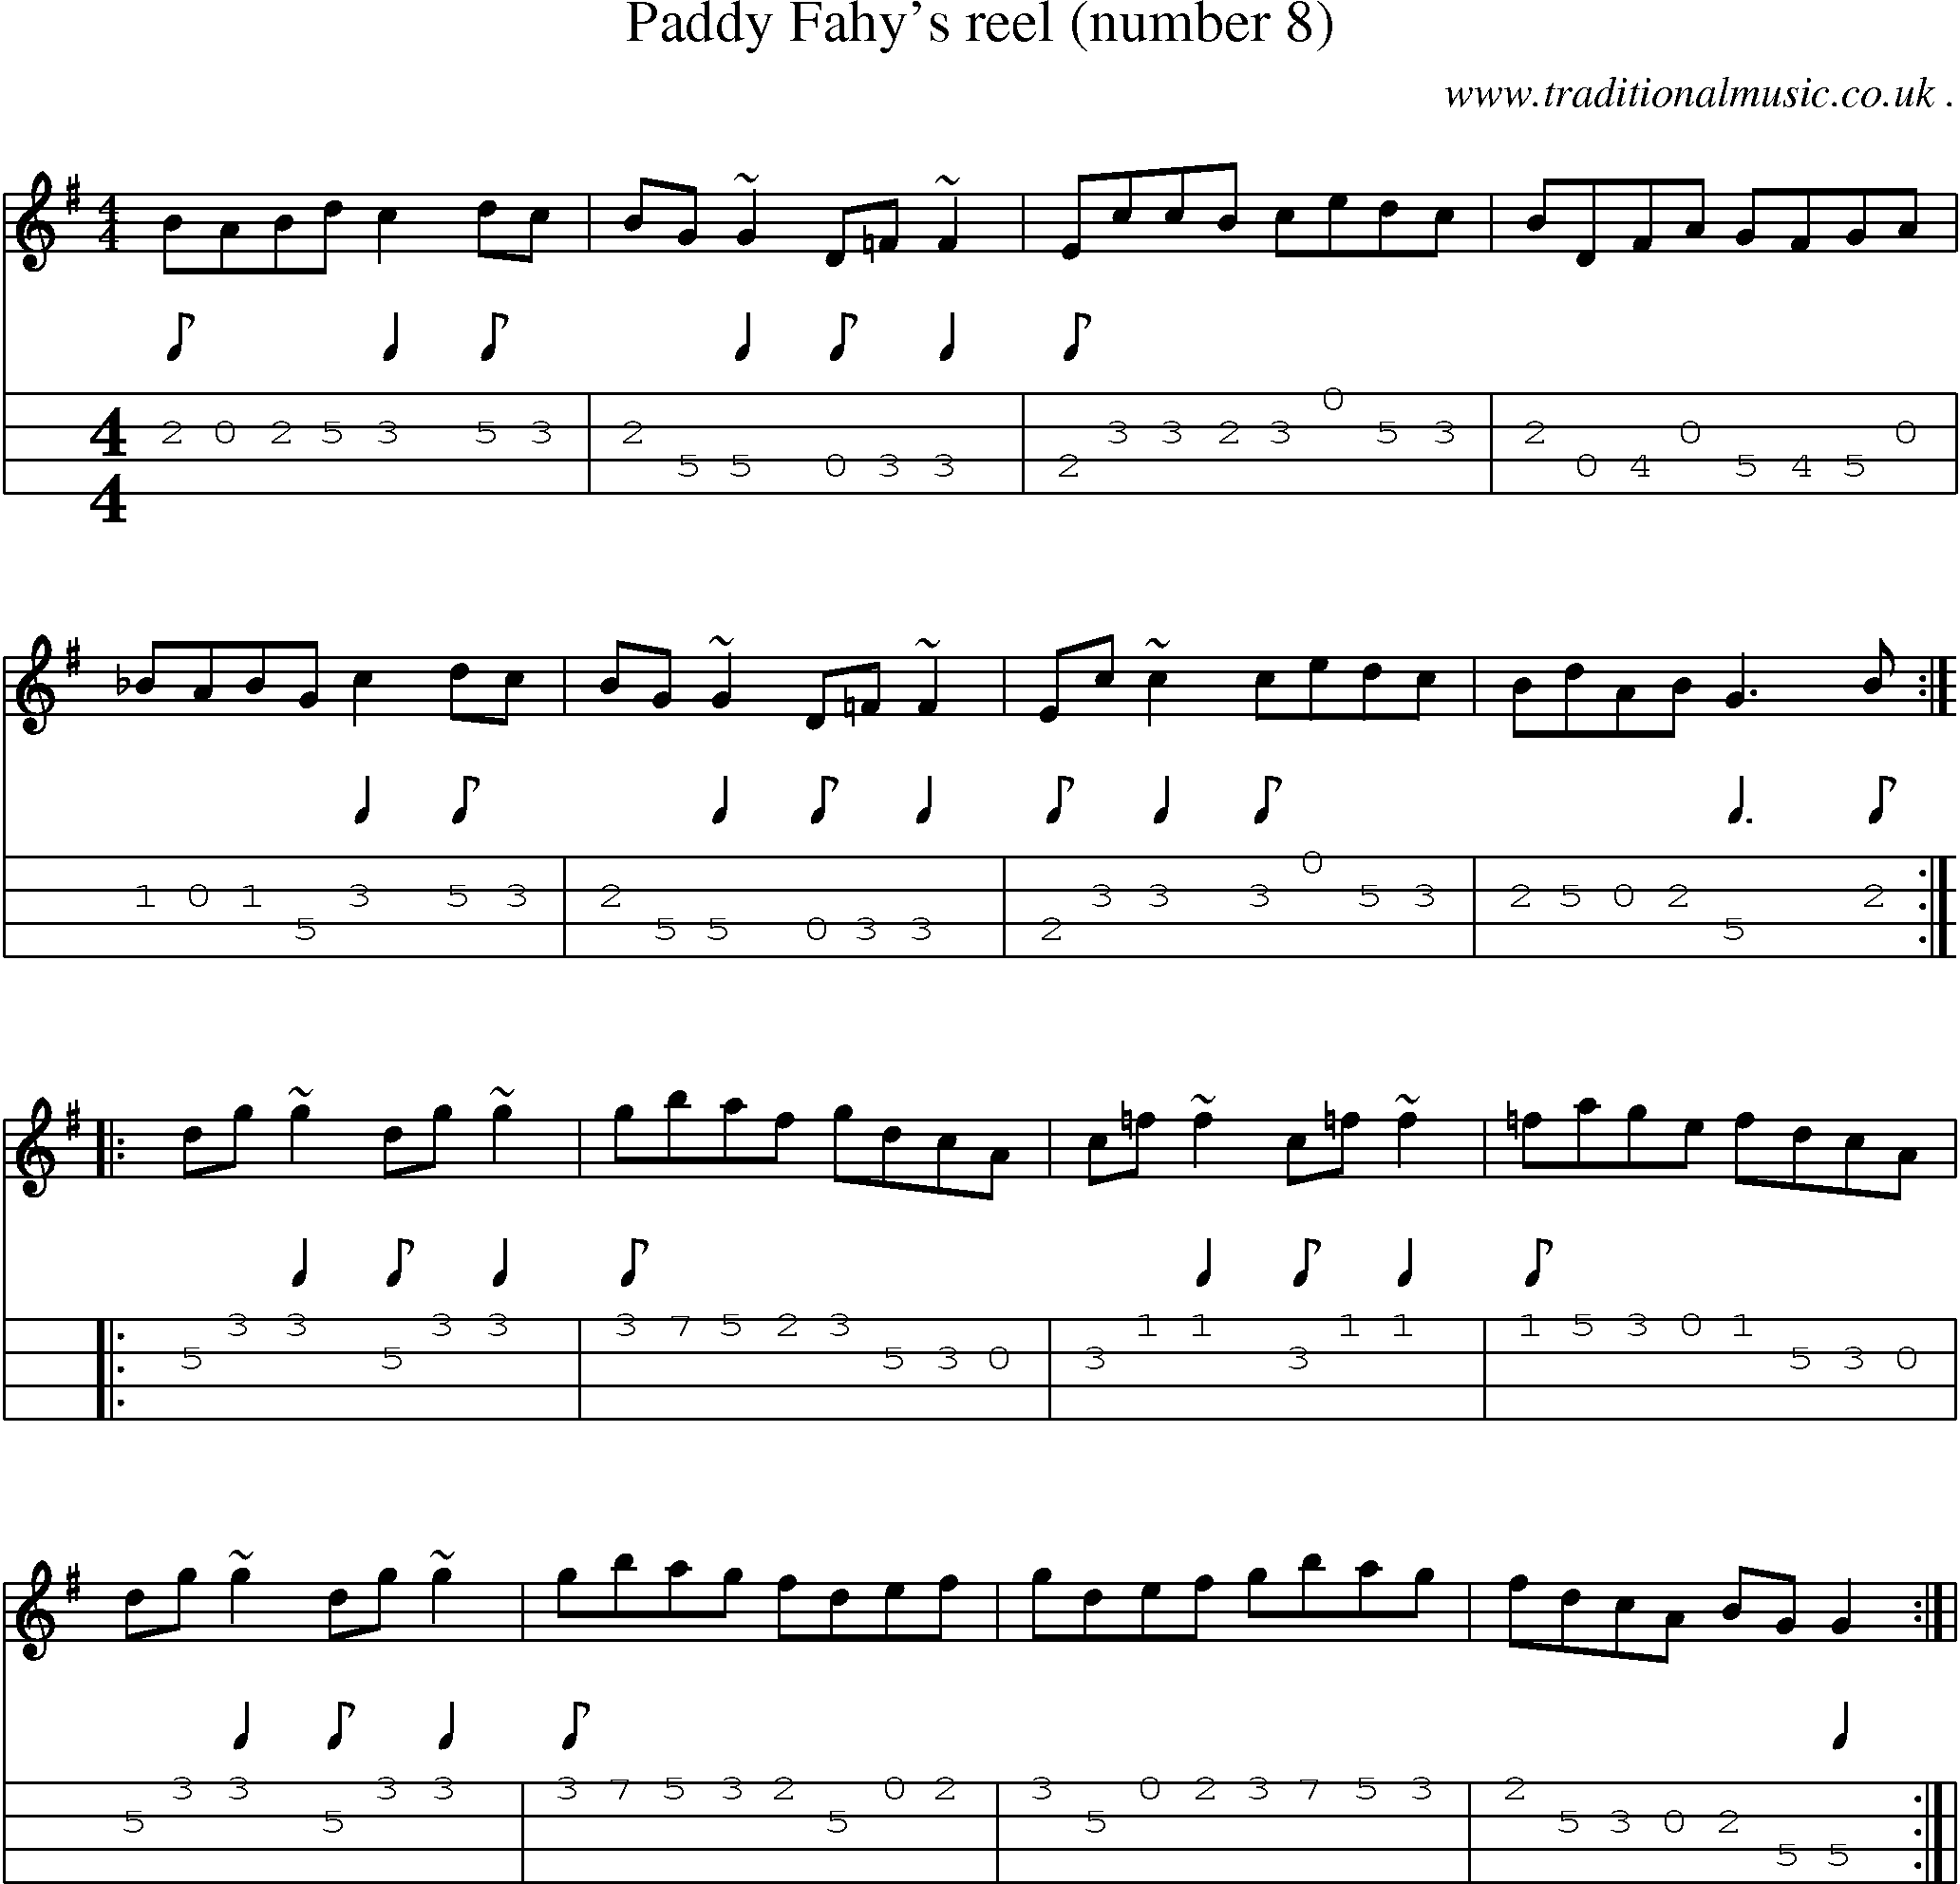 Sheet-music  score, Chords and Mandolin Tabs for Paddy Fahys Reel Number 8